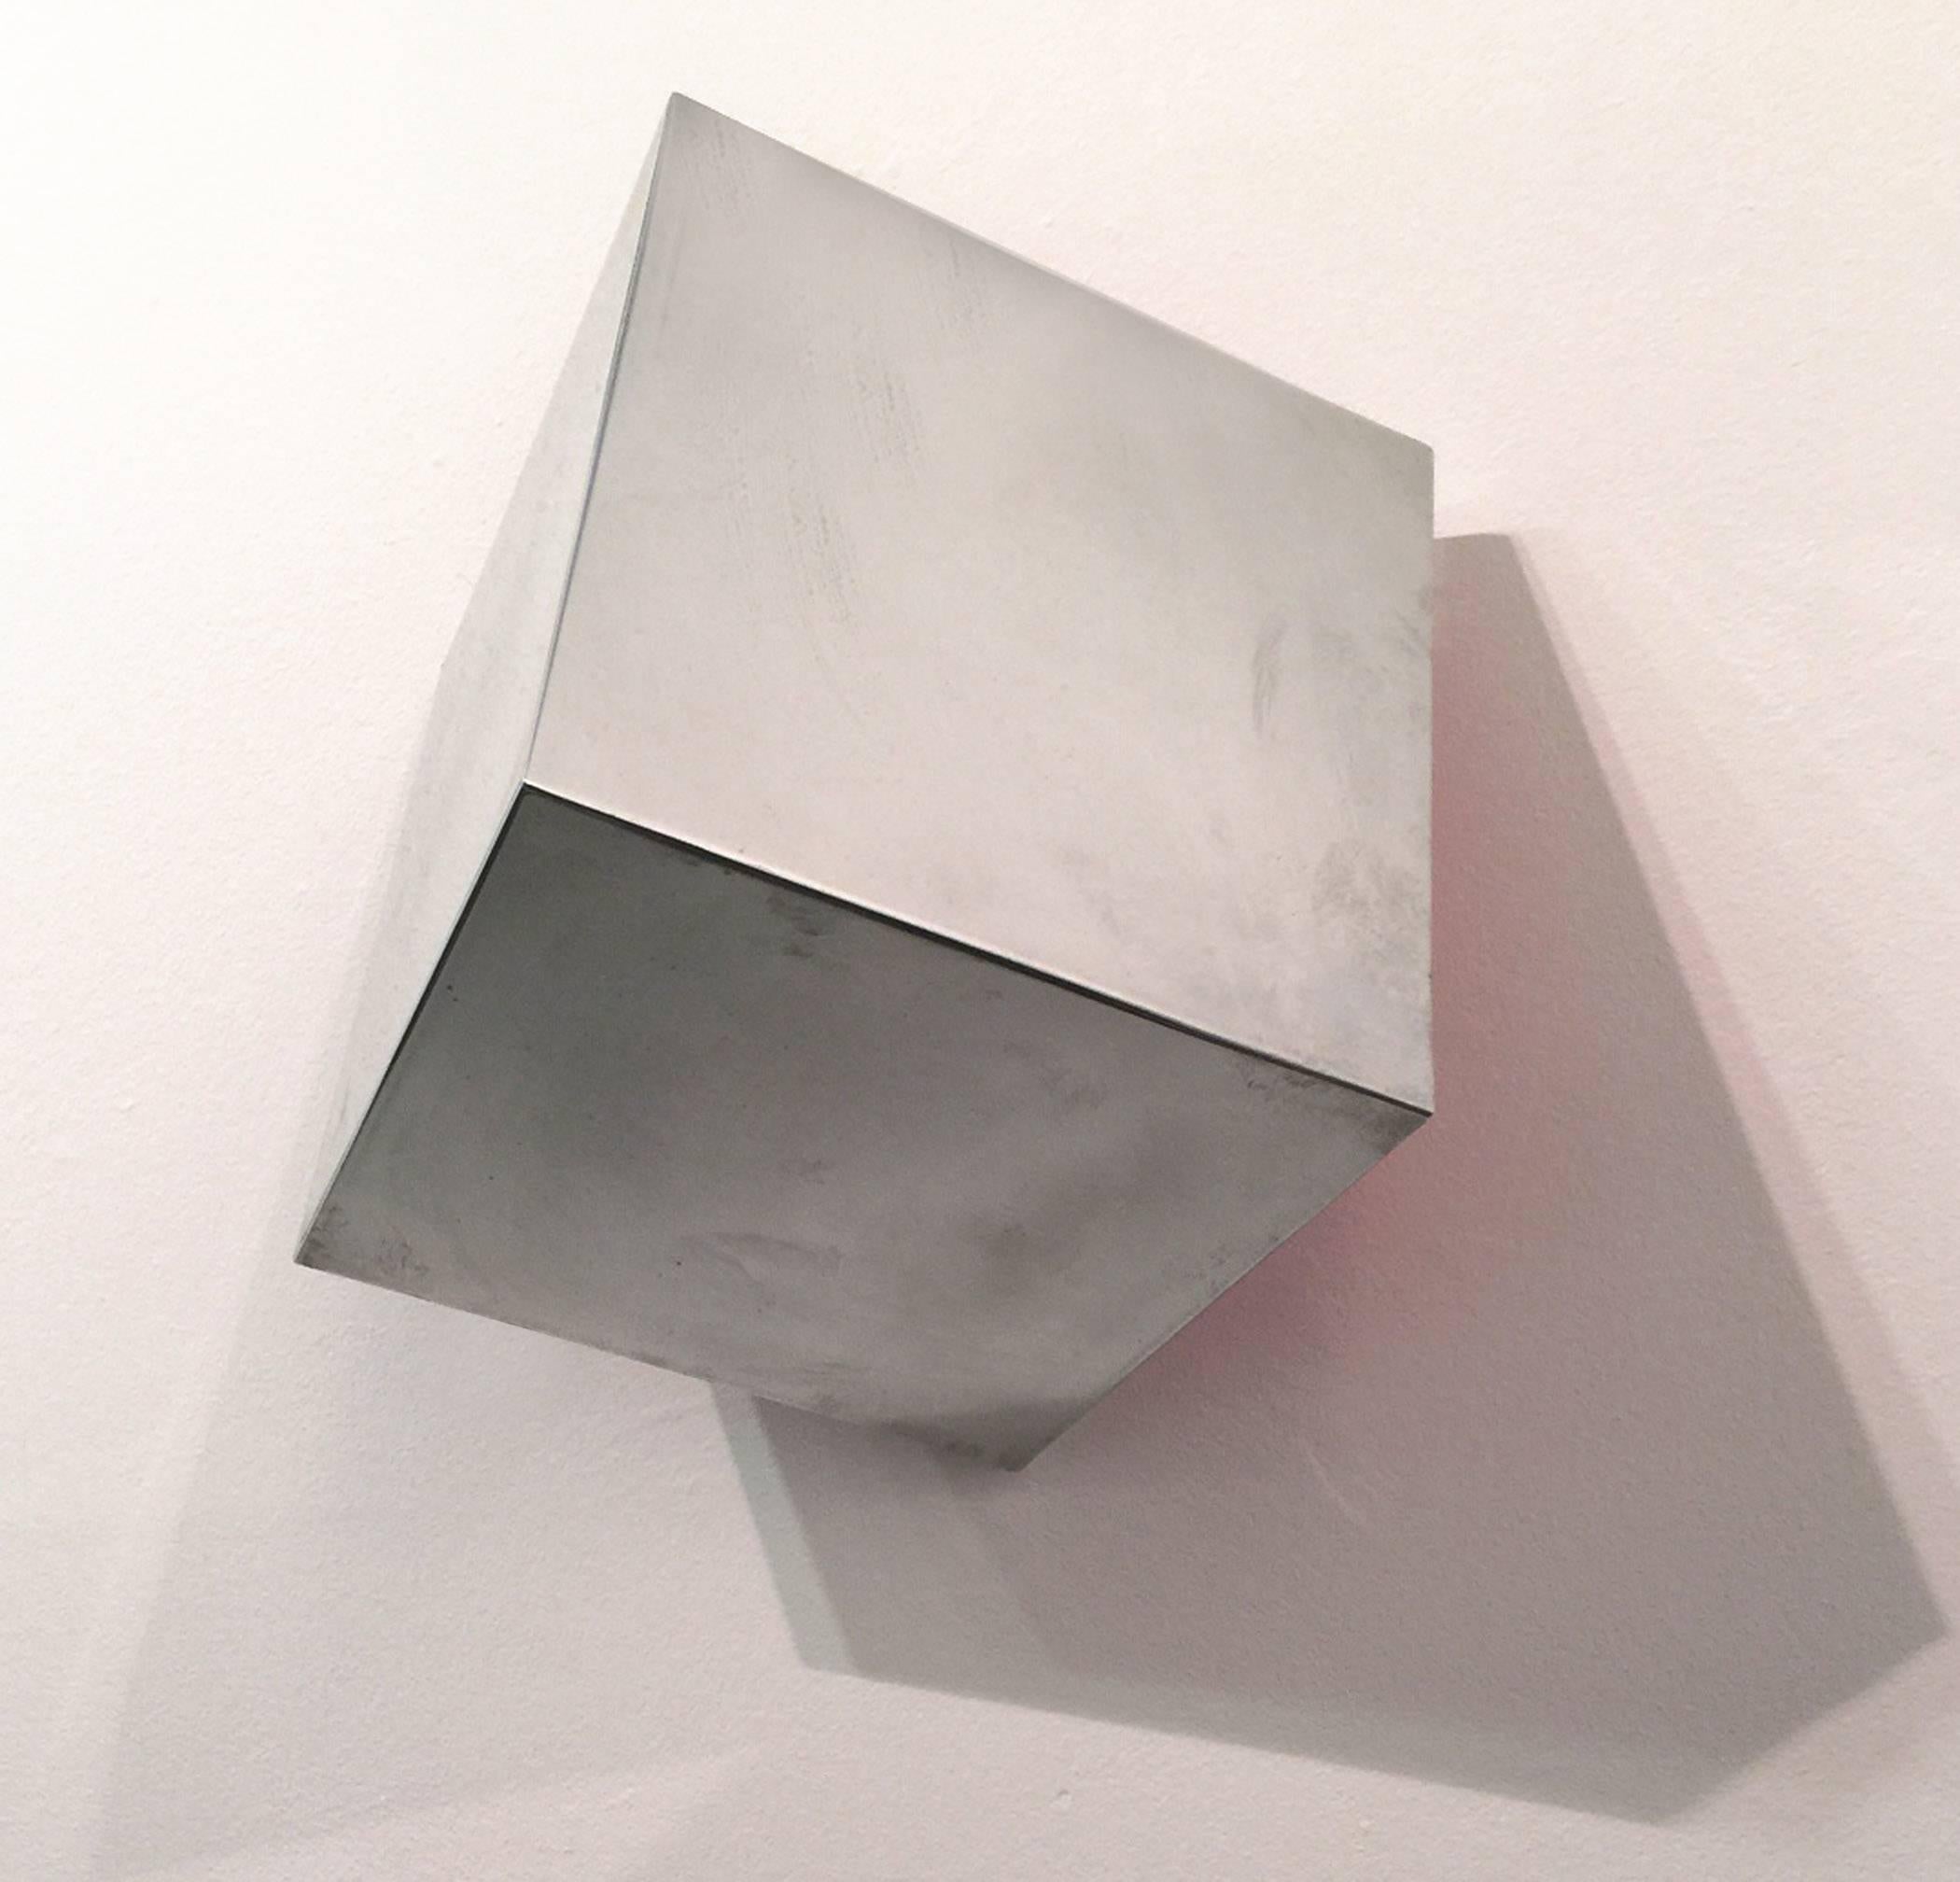 Disappearing Cube - Sculpture by Arno Kortschot